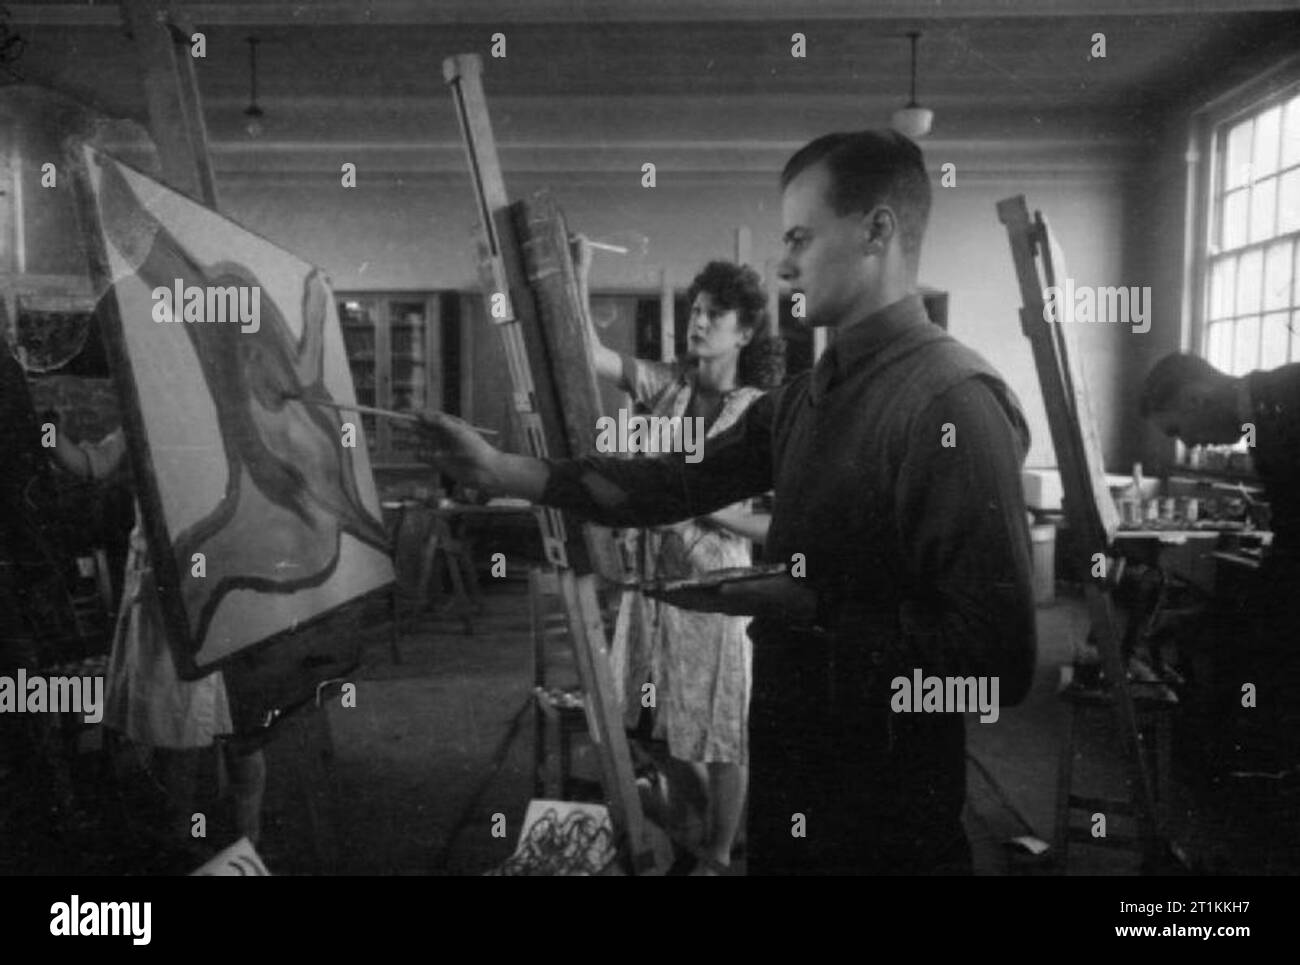 From the Services To Schoolmastering- Re-training at Goldsmith's College, London University, Nottingham, England, 1944 Two of the 28 ex-servicemen training to be teachers at Goldsmiths College (based at Nottingham University since the outbreak of war) are training to have art as their main subject. Here one of the men takes part in an art class at Nottingham University, which, according to the original caption, should give him some 'sense of design'. Stock Photo